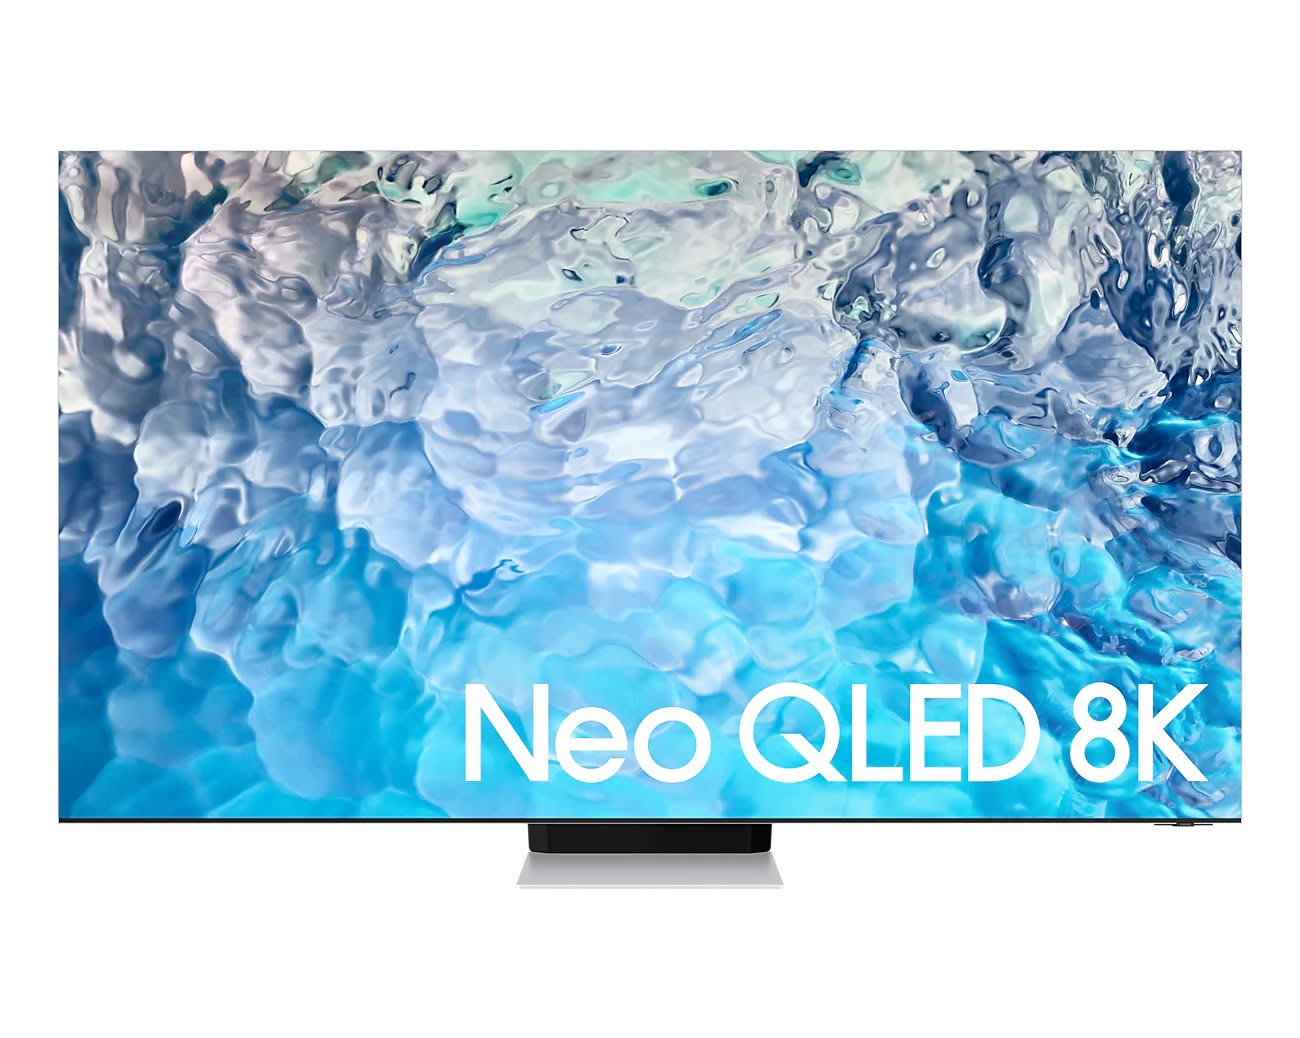 neo qled 8k product pic